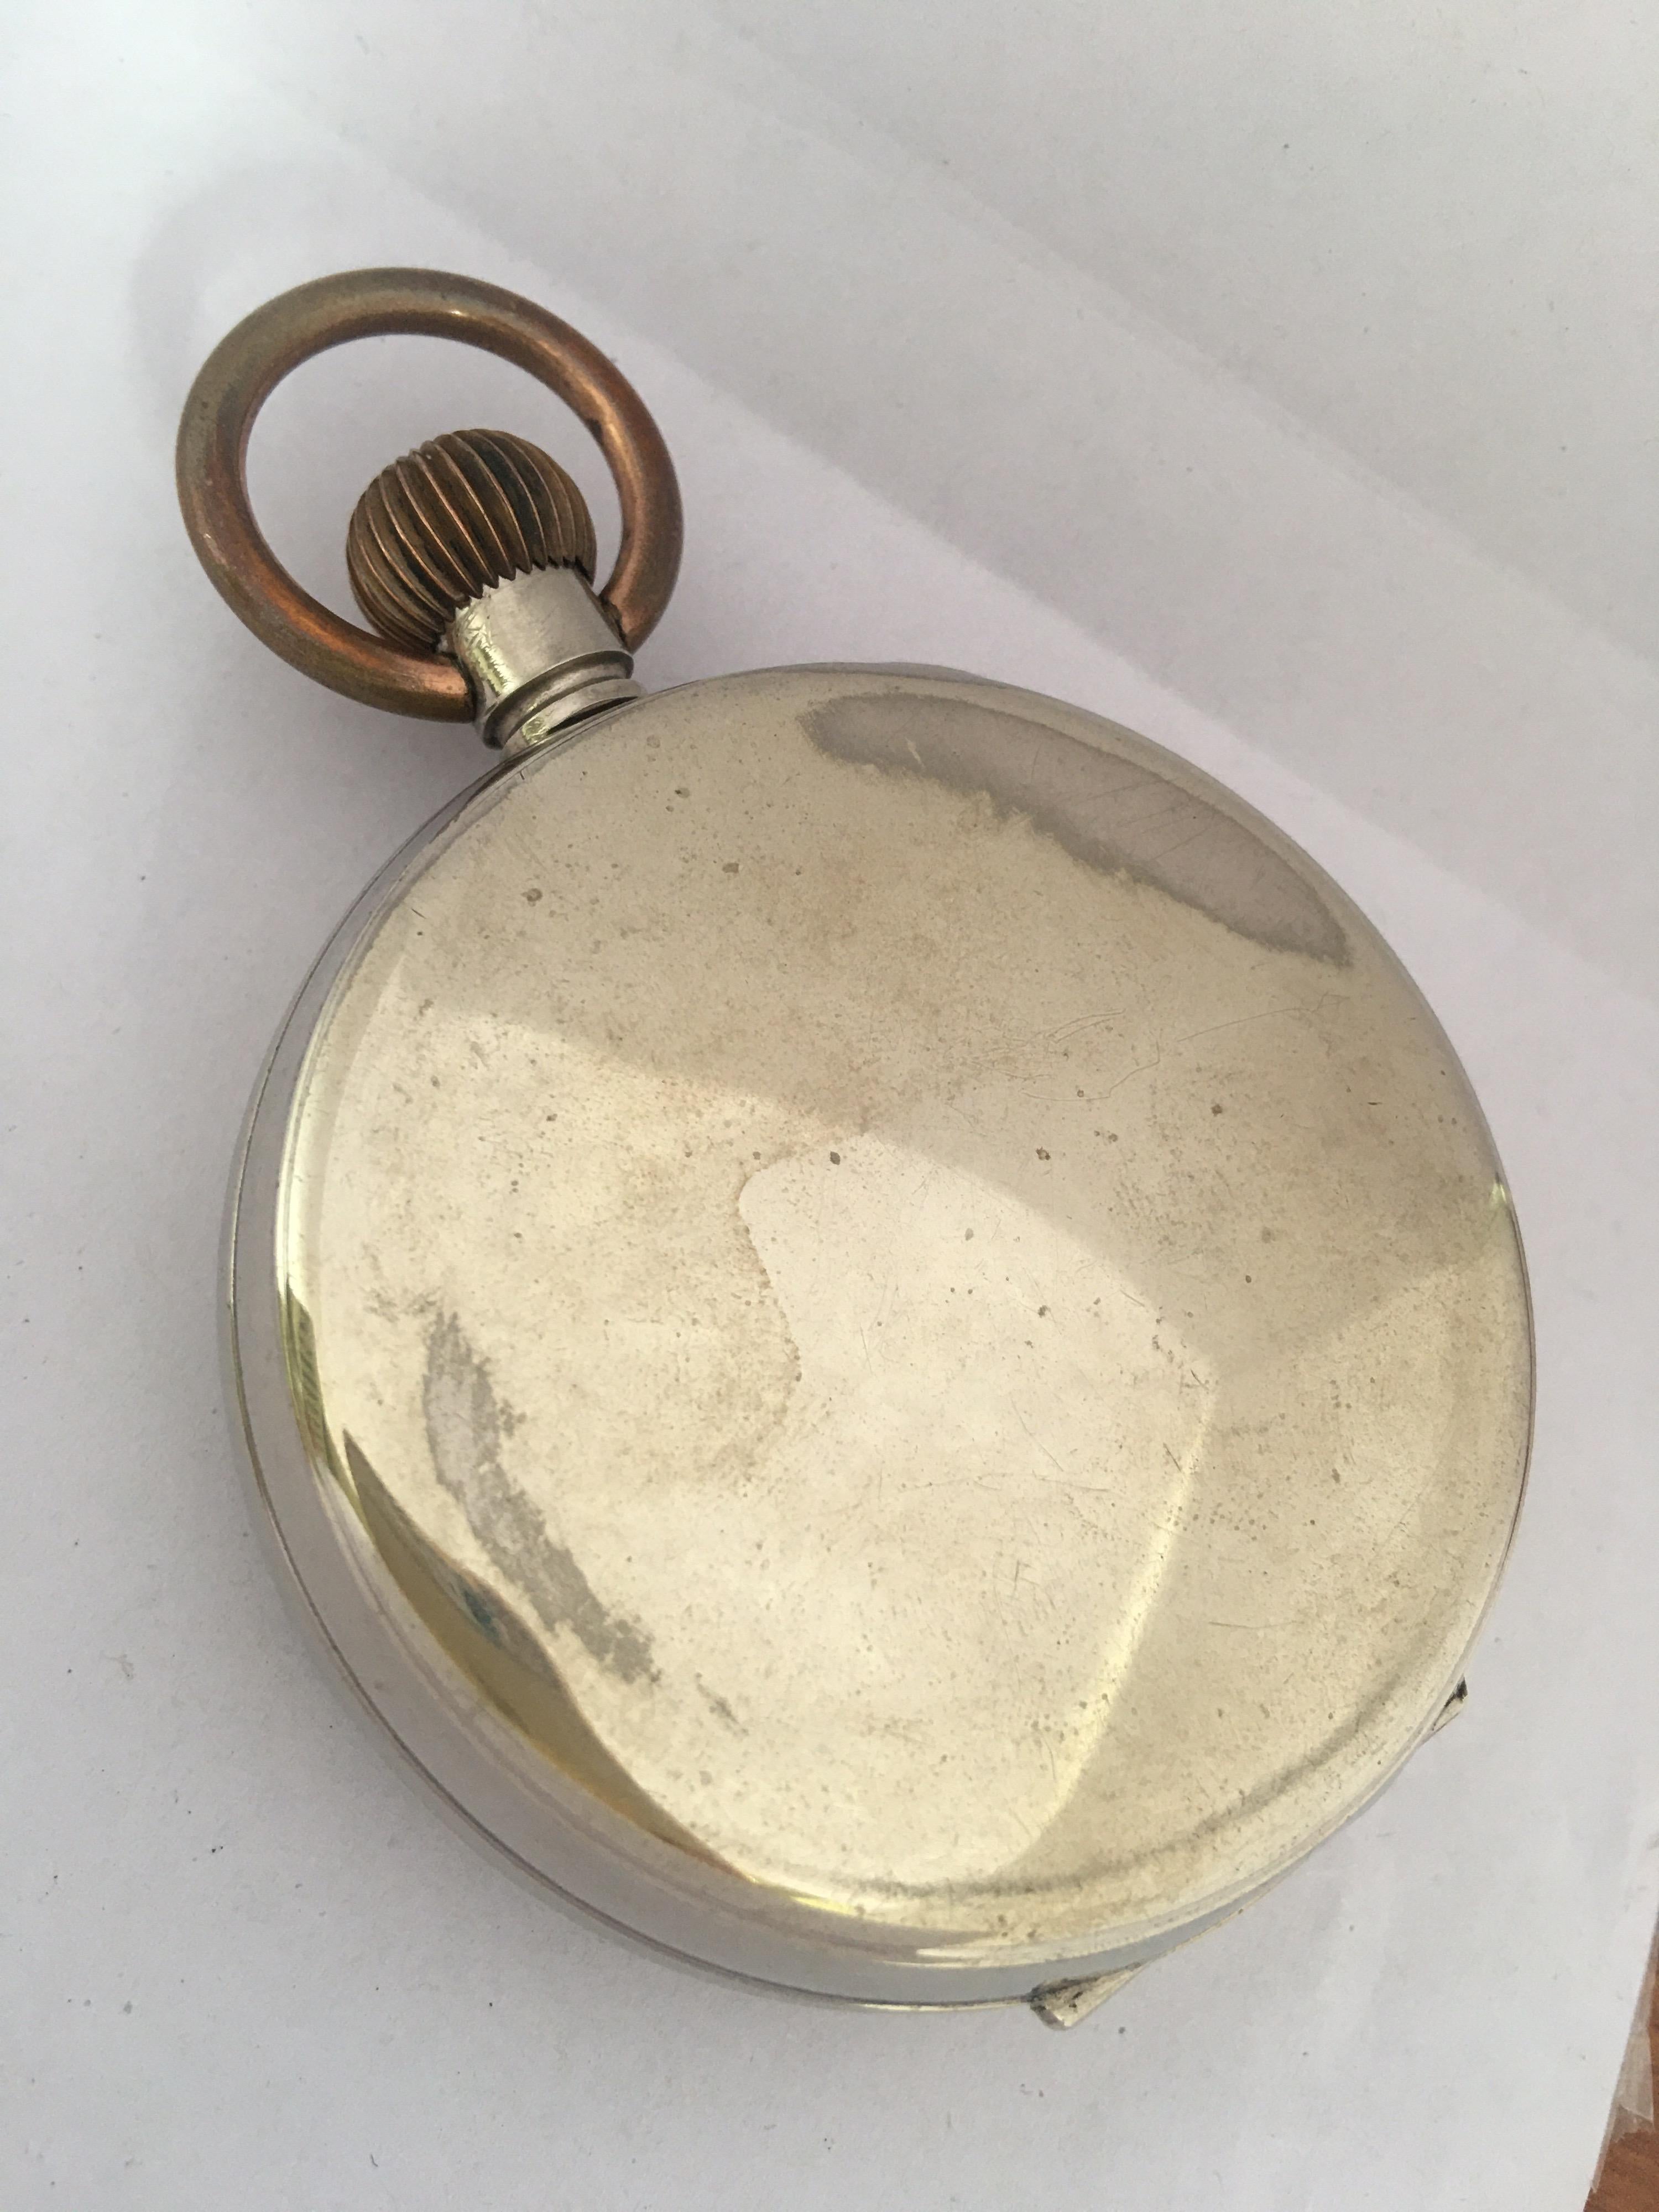 This beautiful antique 64mm diameter (excluding the crown) Hand winding silver plated pocket watch is in good working condition and it is running well. Visible signs of ageing and wear with light marks on the glass and on the watch case. Visible